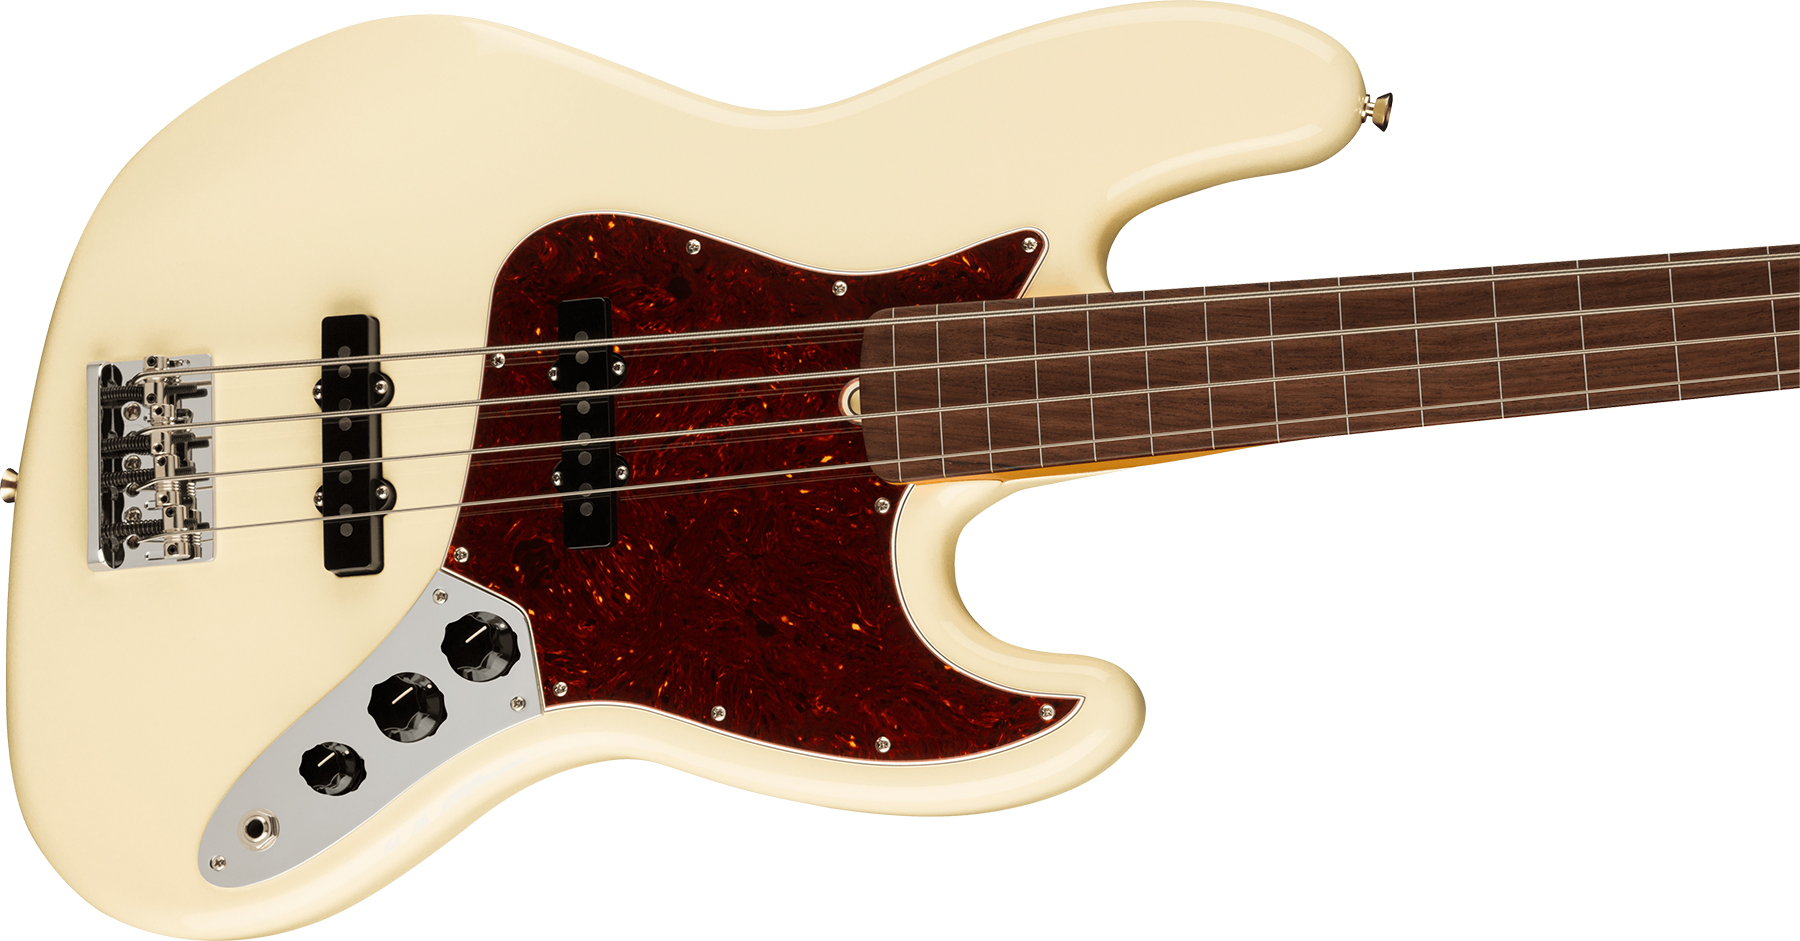 Fender Jazz Bass Fretless American Professional Ii Usa Rw - Olympic White - Solid body electric bass - Variation 2